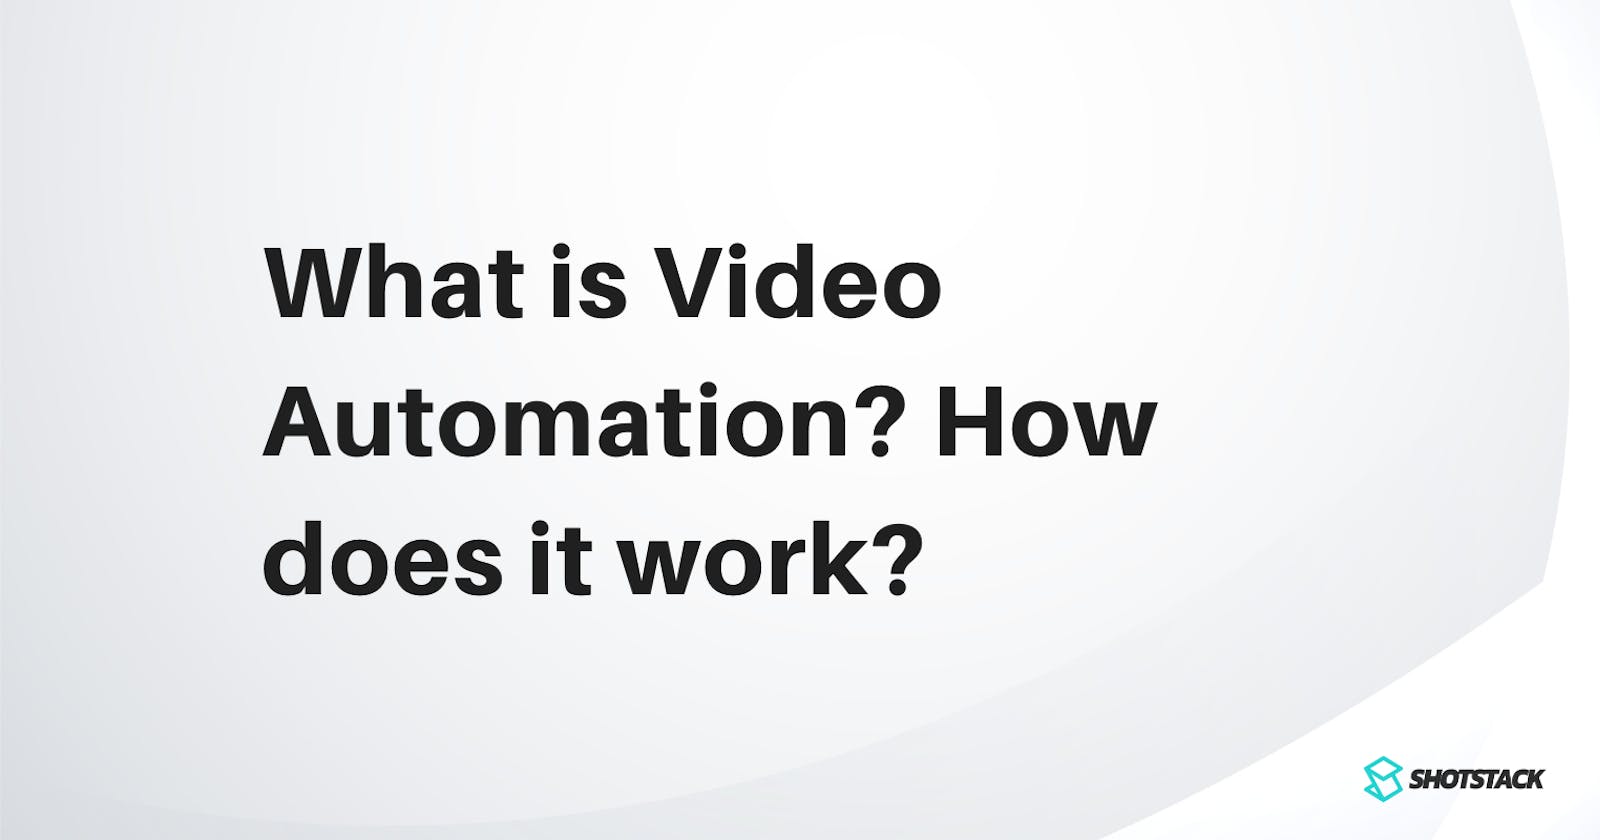 What is Video Automation and how does it work?